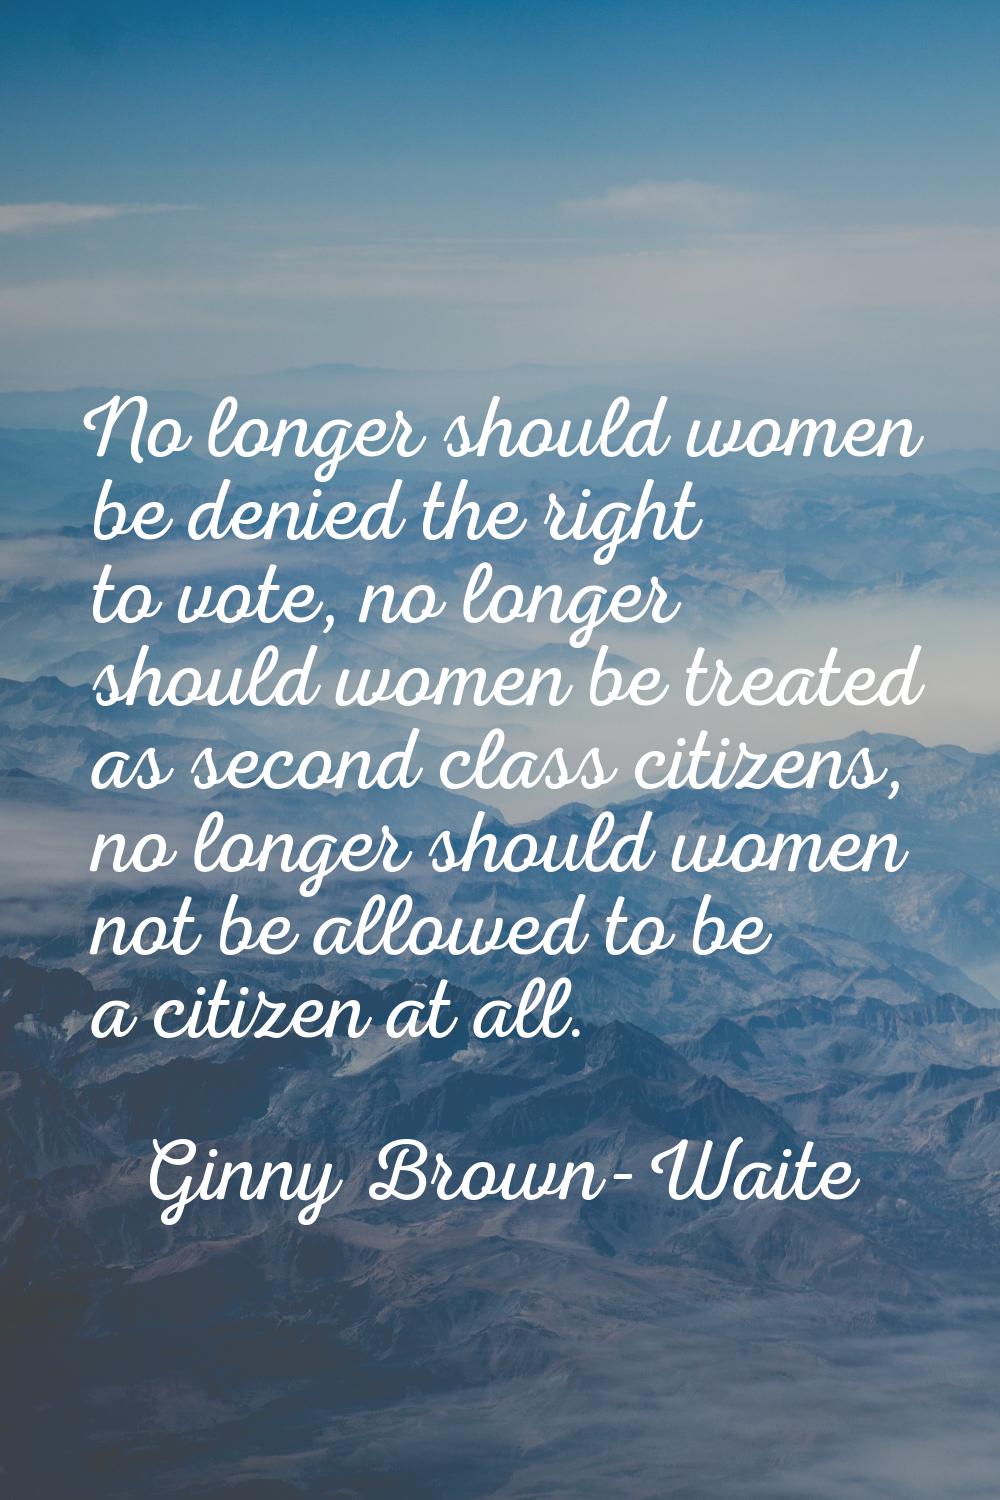 No longer should women be denied the right to vote, no longer should women be treated as second cla